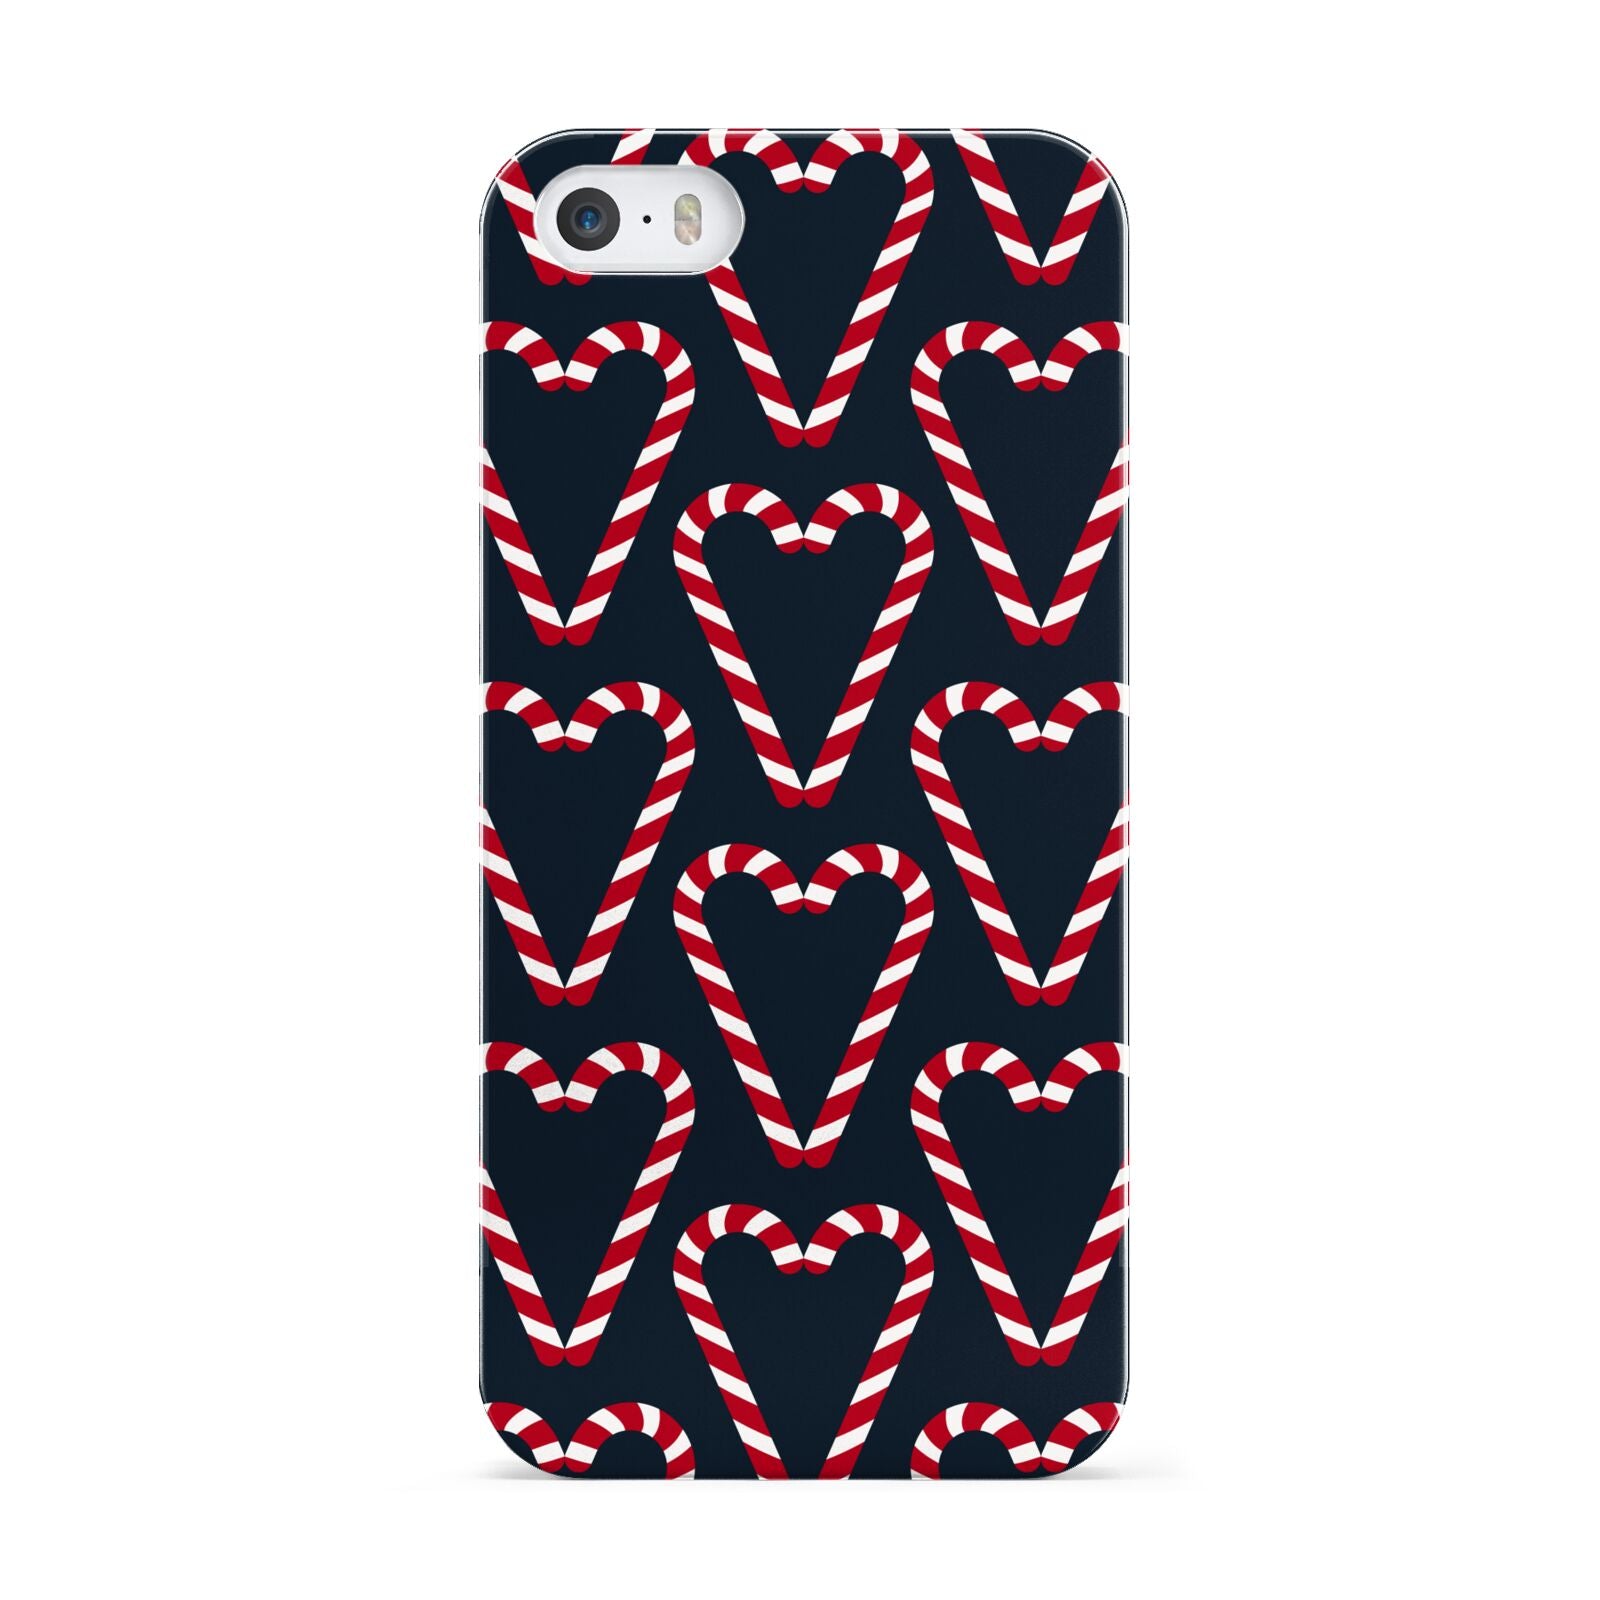 Candy Cane Pattern Apple iPhone 5 Case